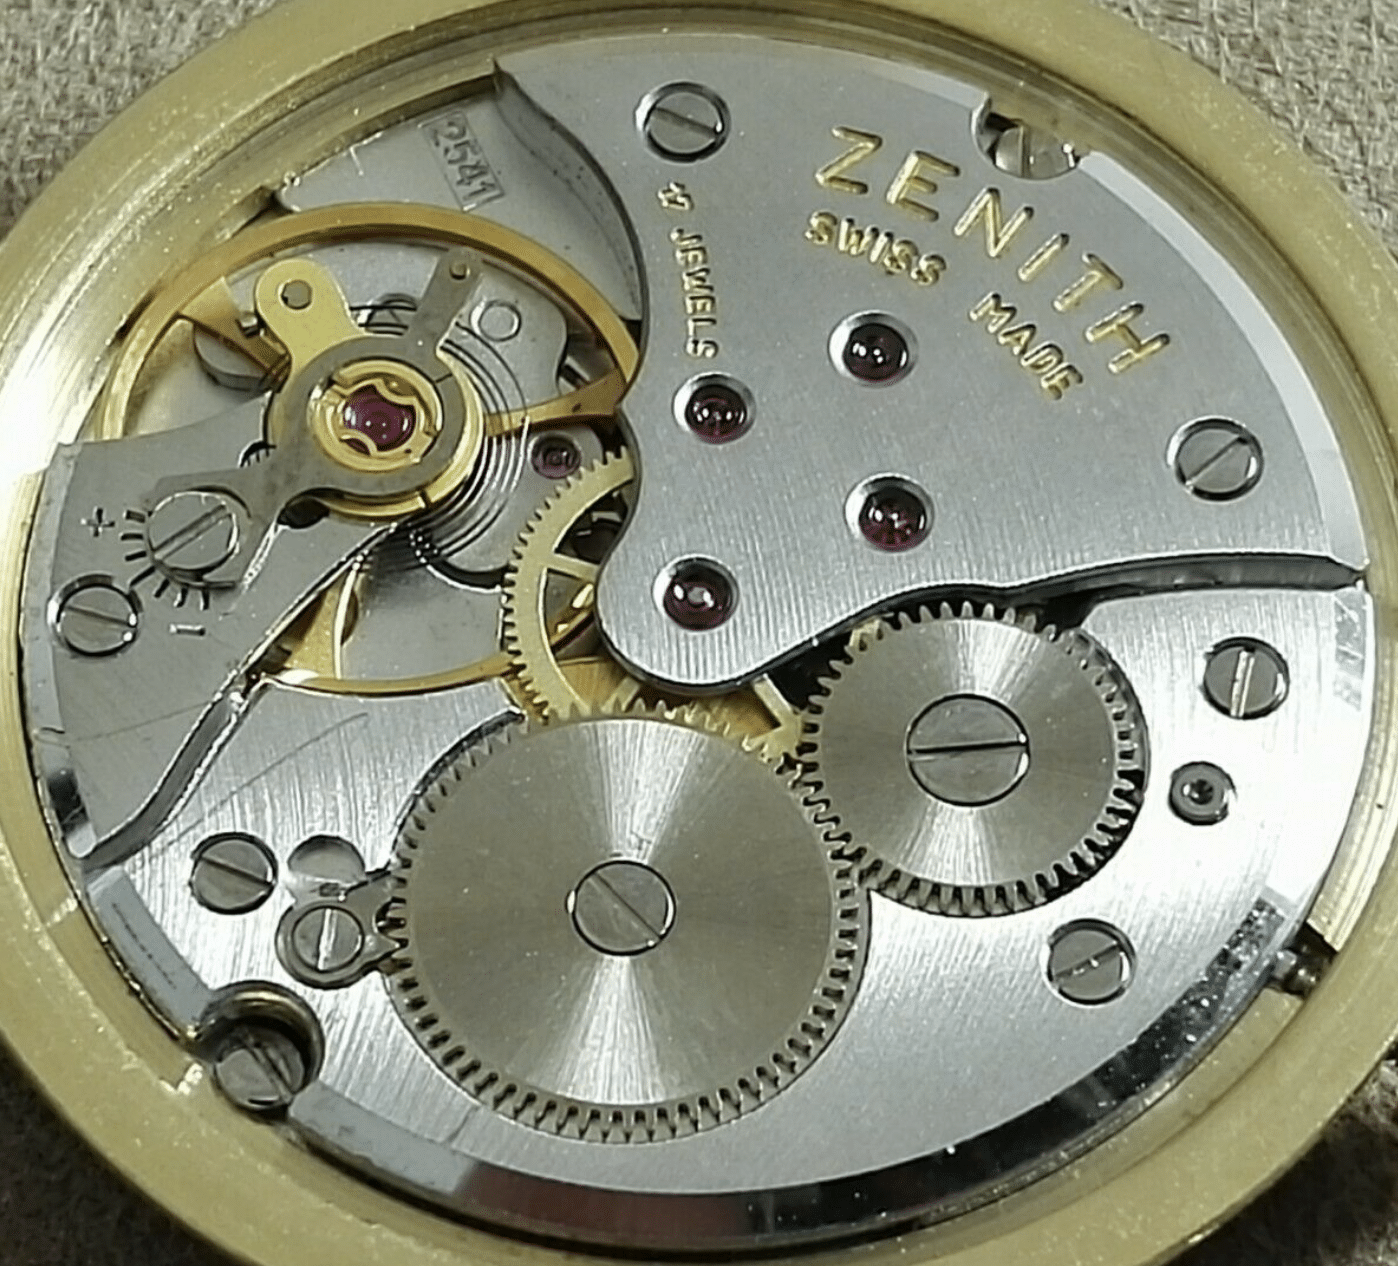 Zenith-caliber-2541-movement-specifications-and-photo